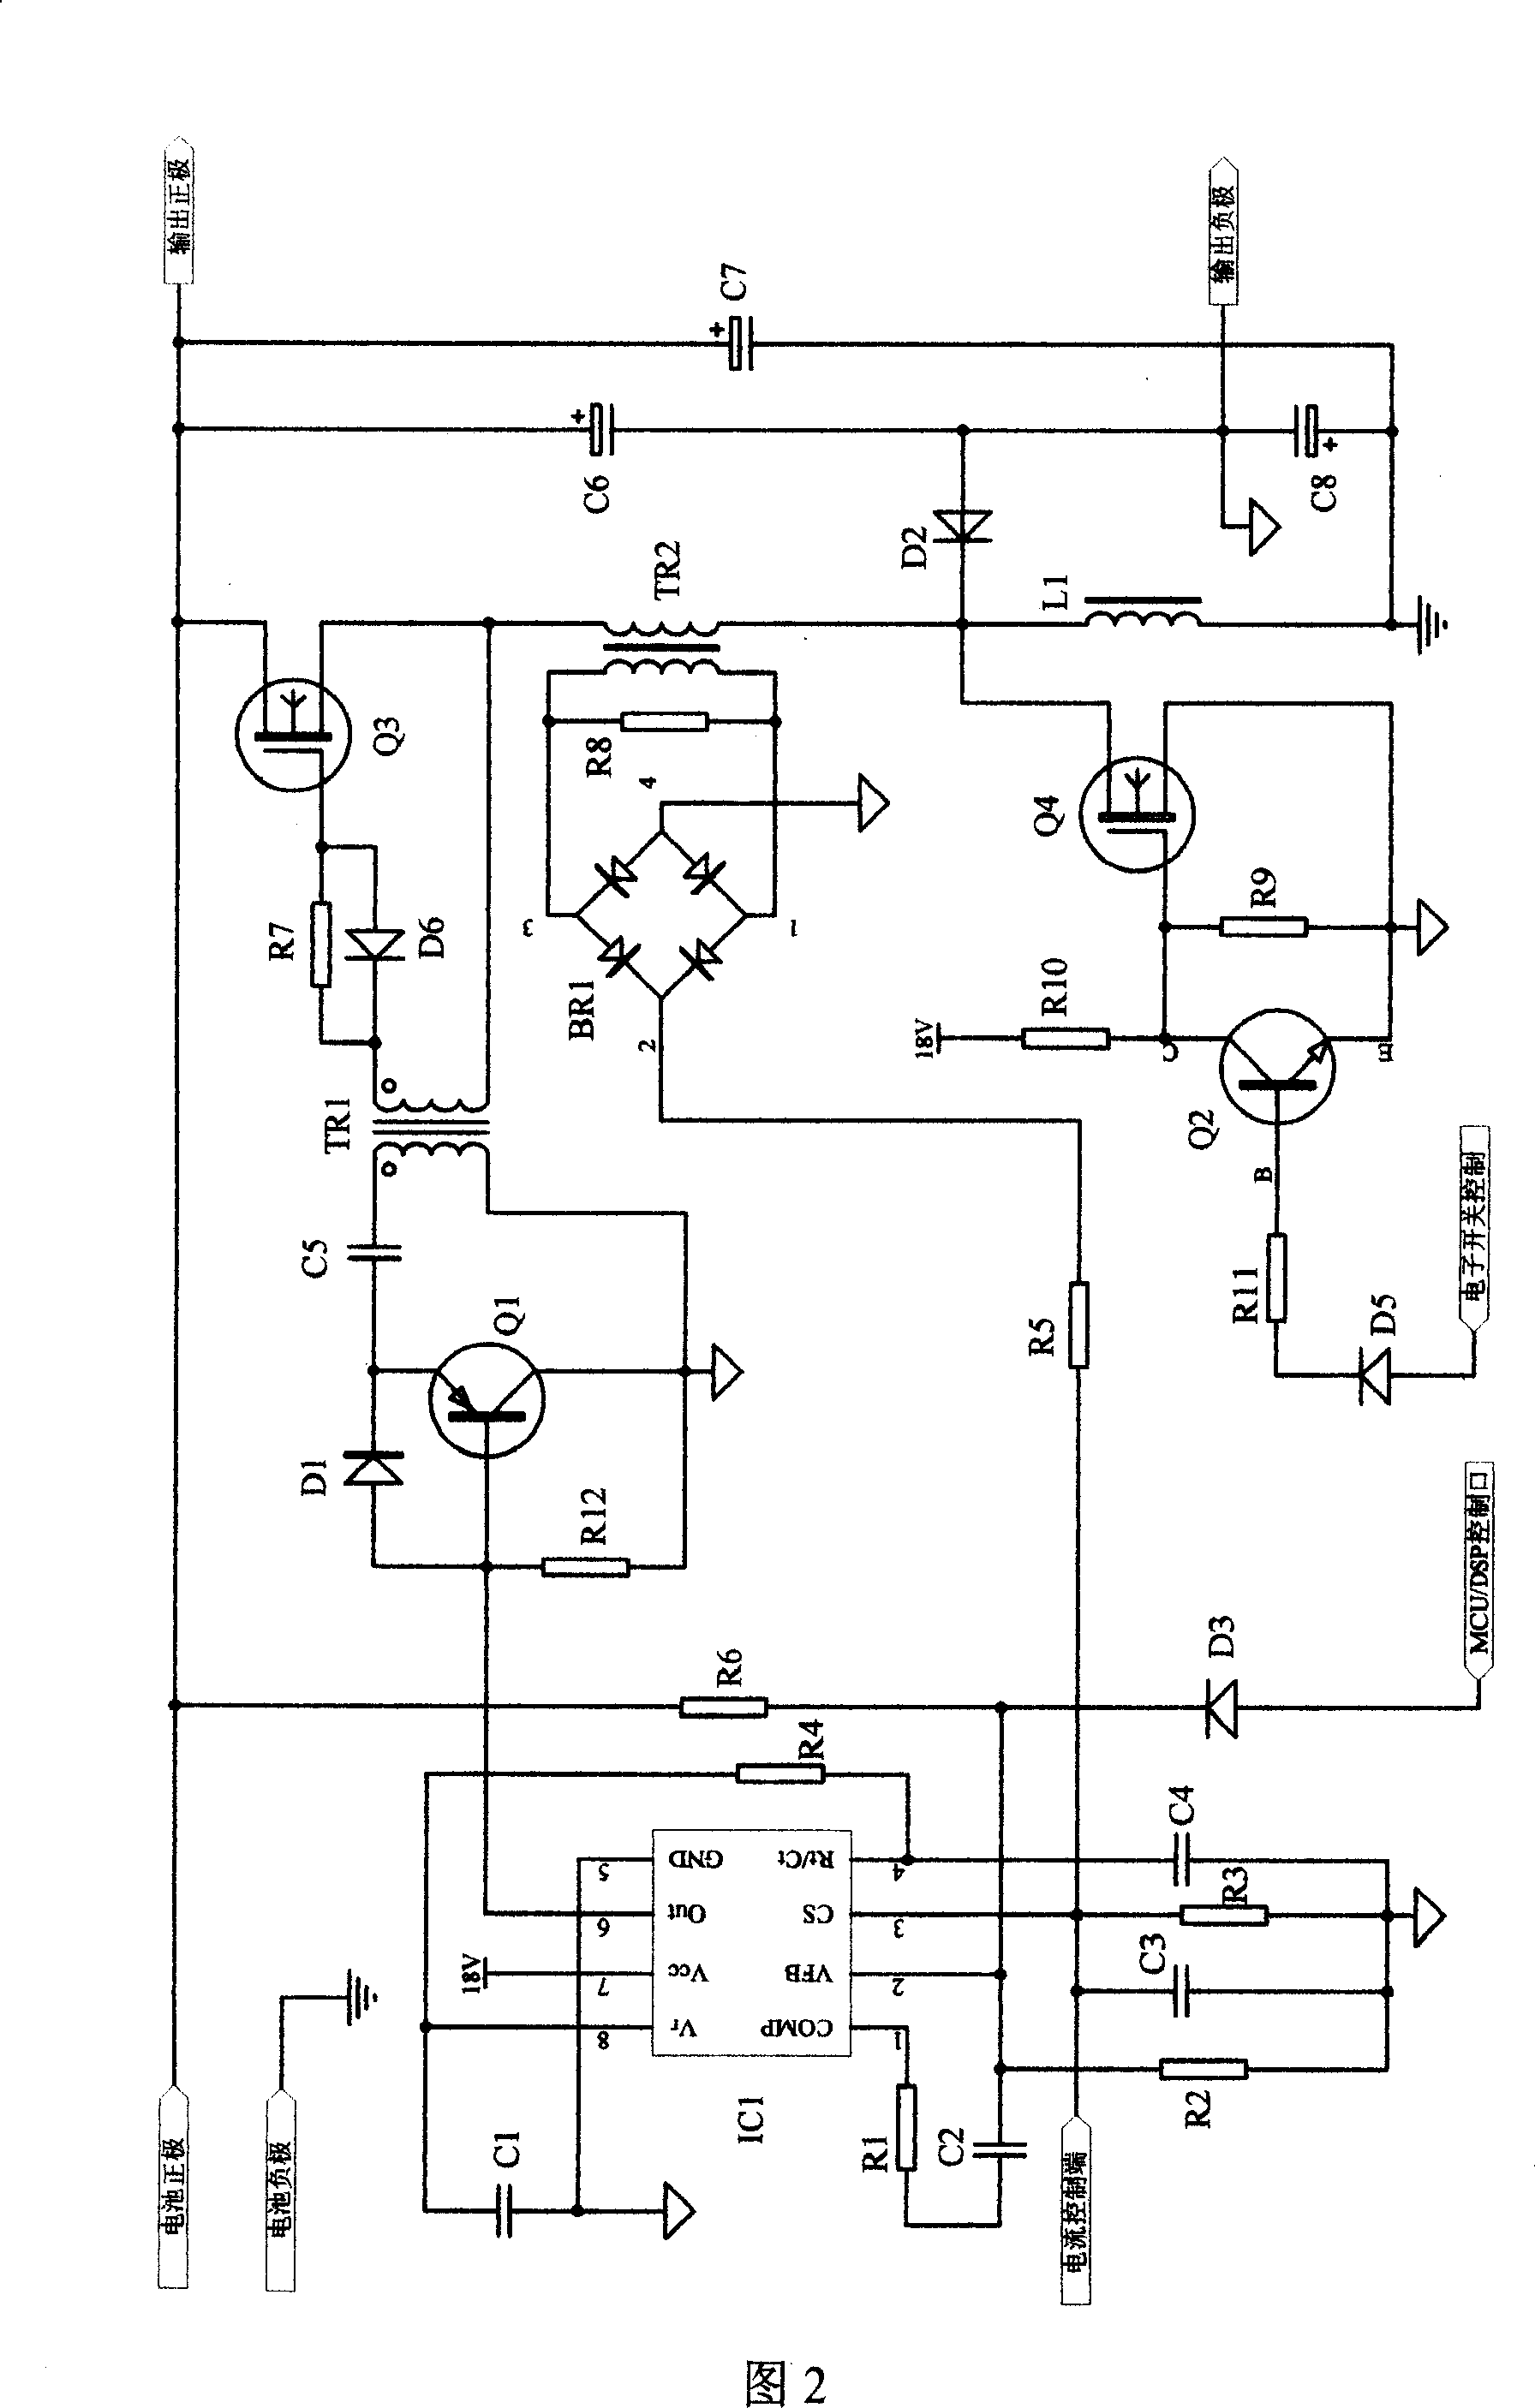 Control method and device for increasing DC brushless motor speed